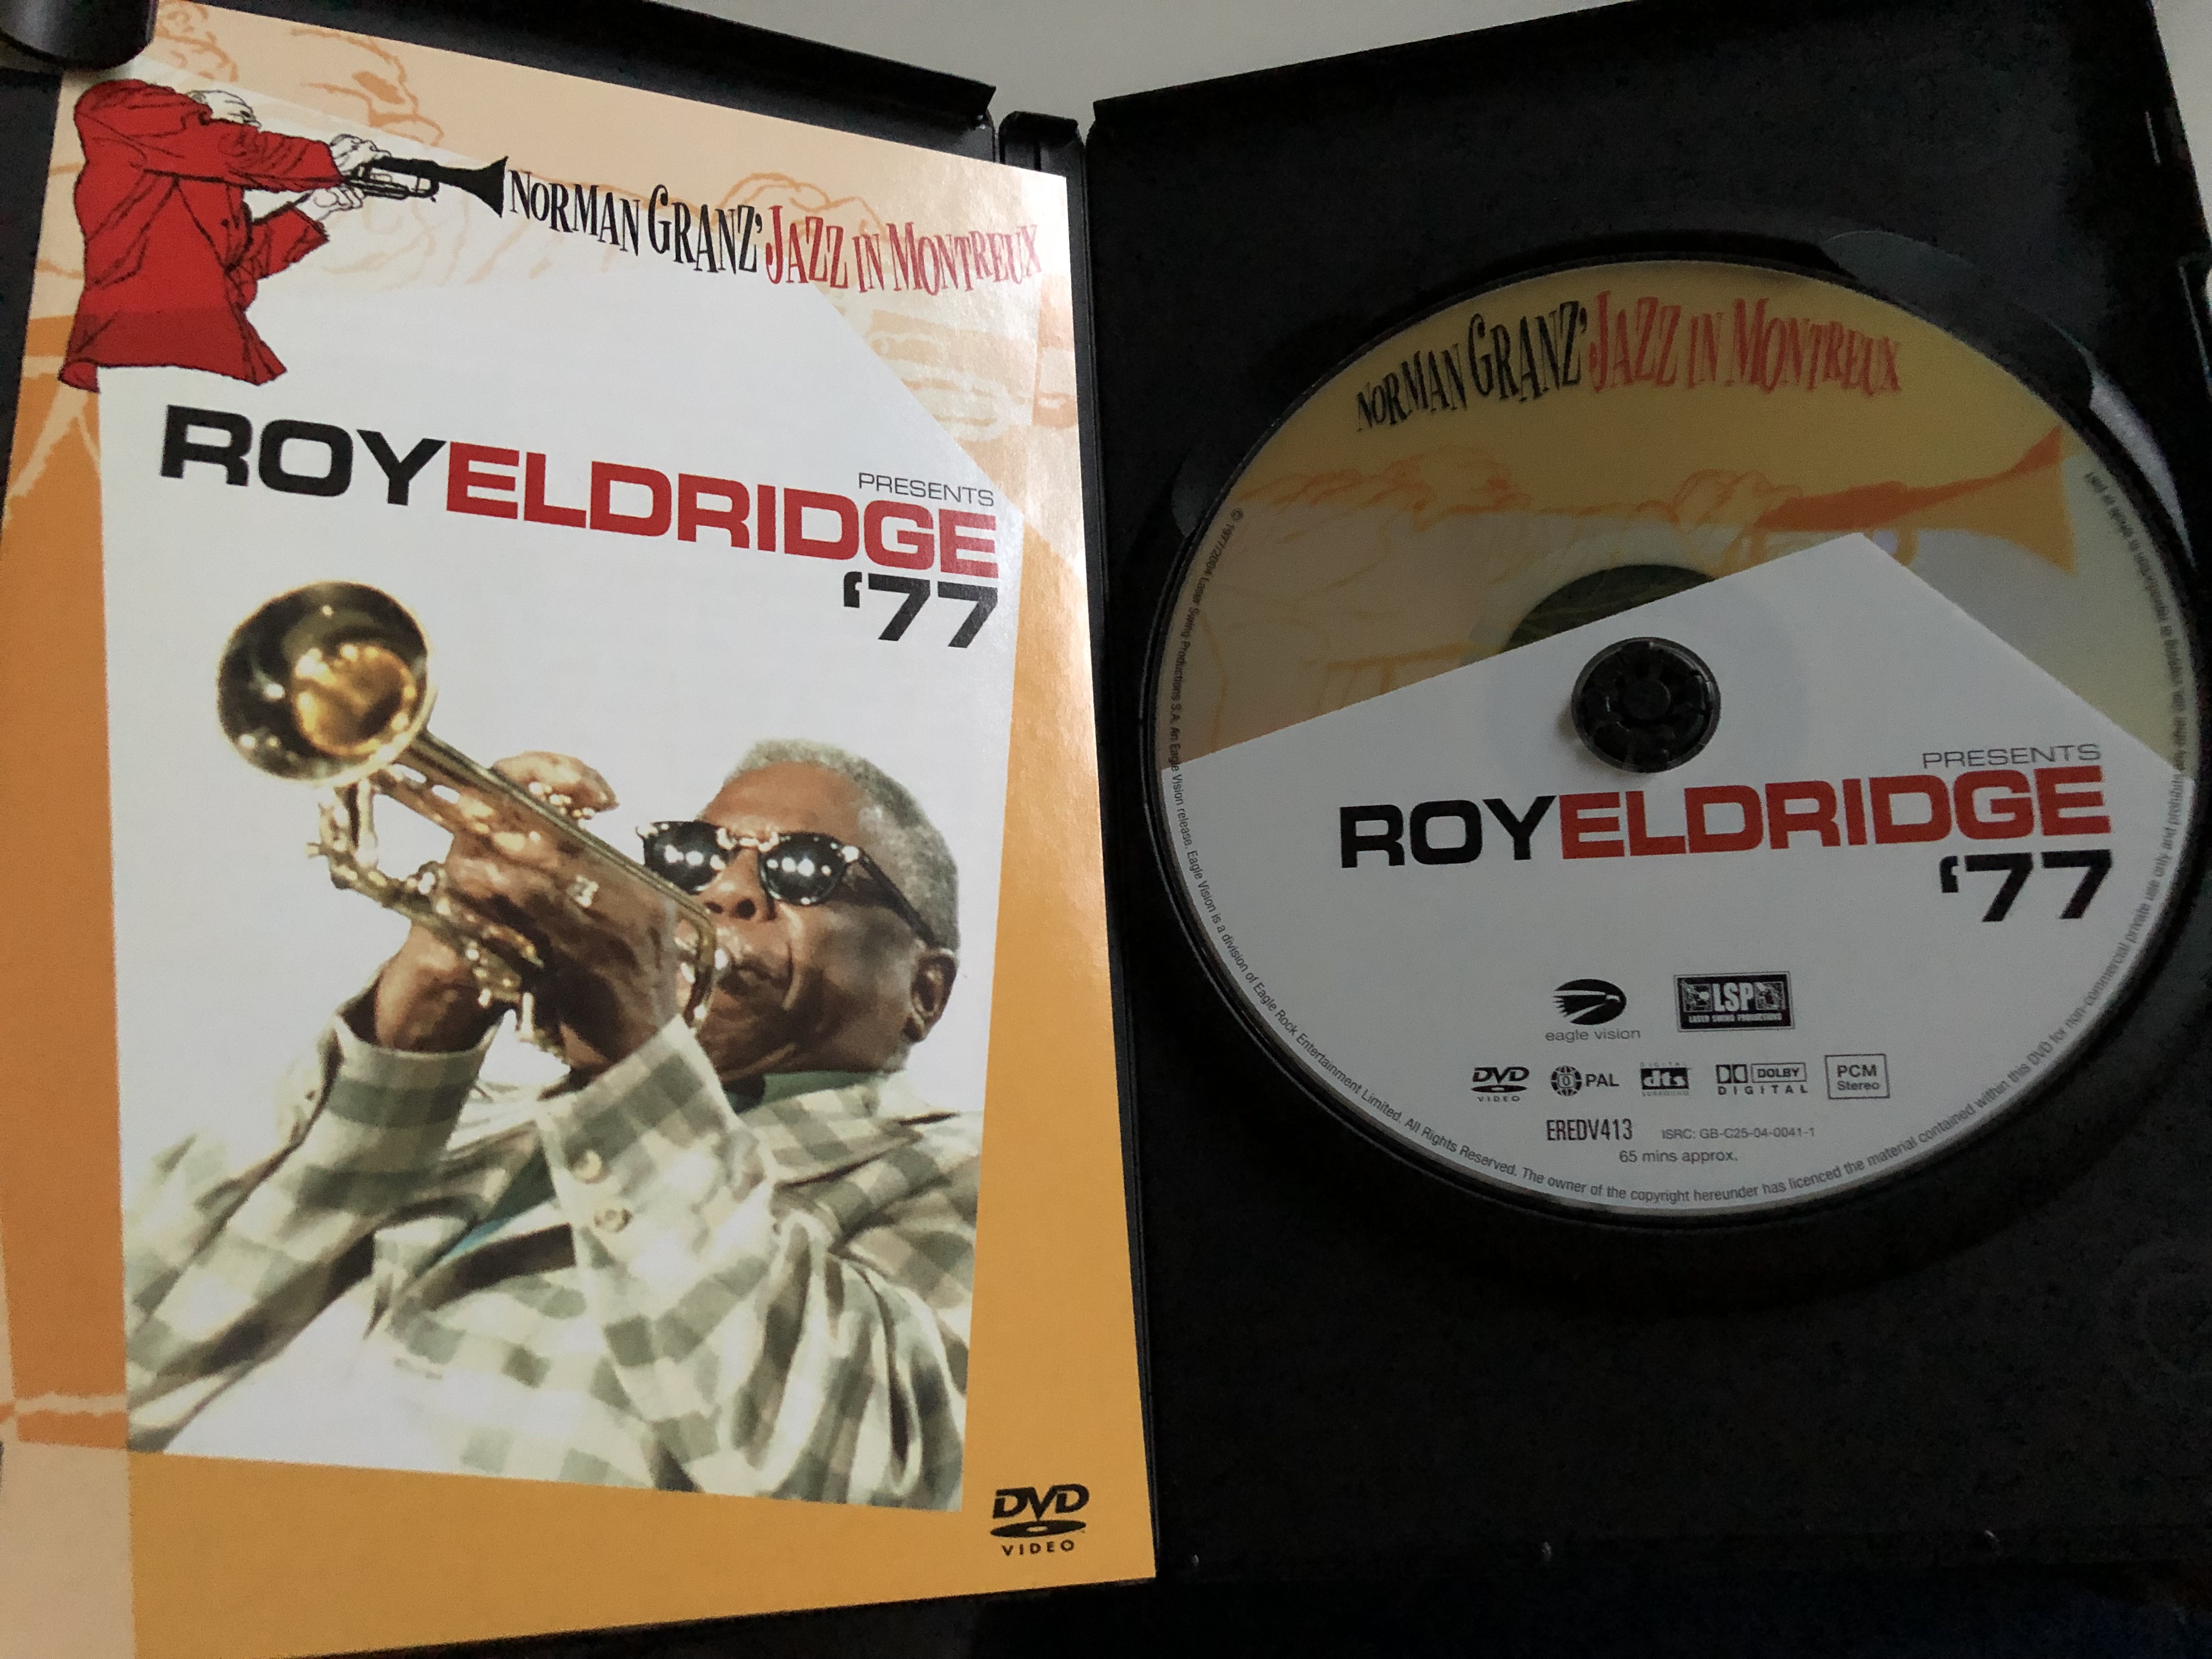 roy-eldridge-77-dvd-2004-norman-granz-jazz-in-montreux-between-the-devil-and-the-deep-blue-sea-blues-i-surrender-dear-perdido-restored-and-remastered-in-dolby-digital-5.1-dts-surround-3-.jpg